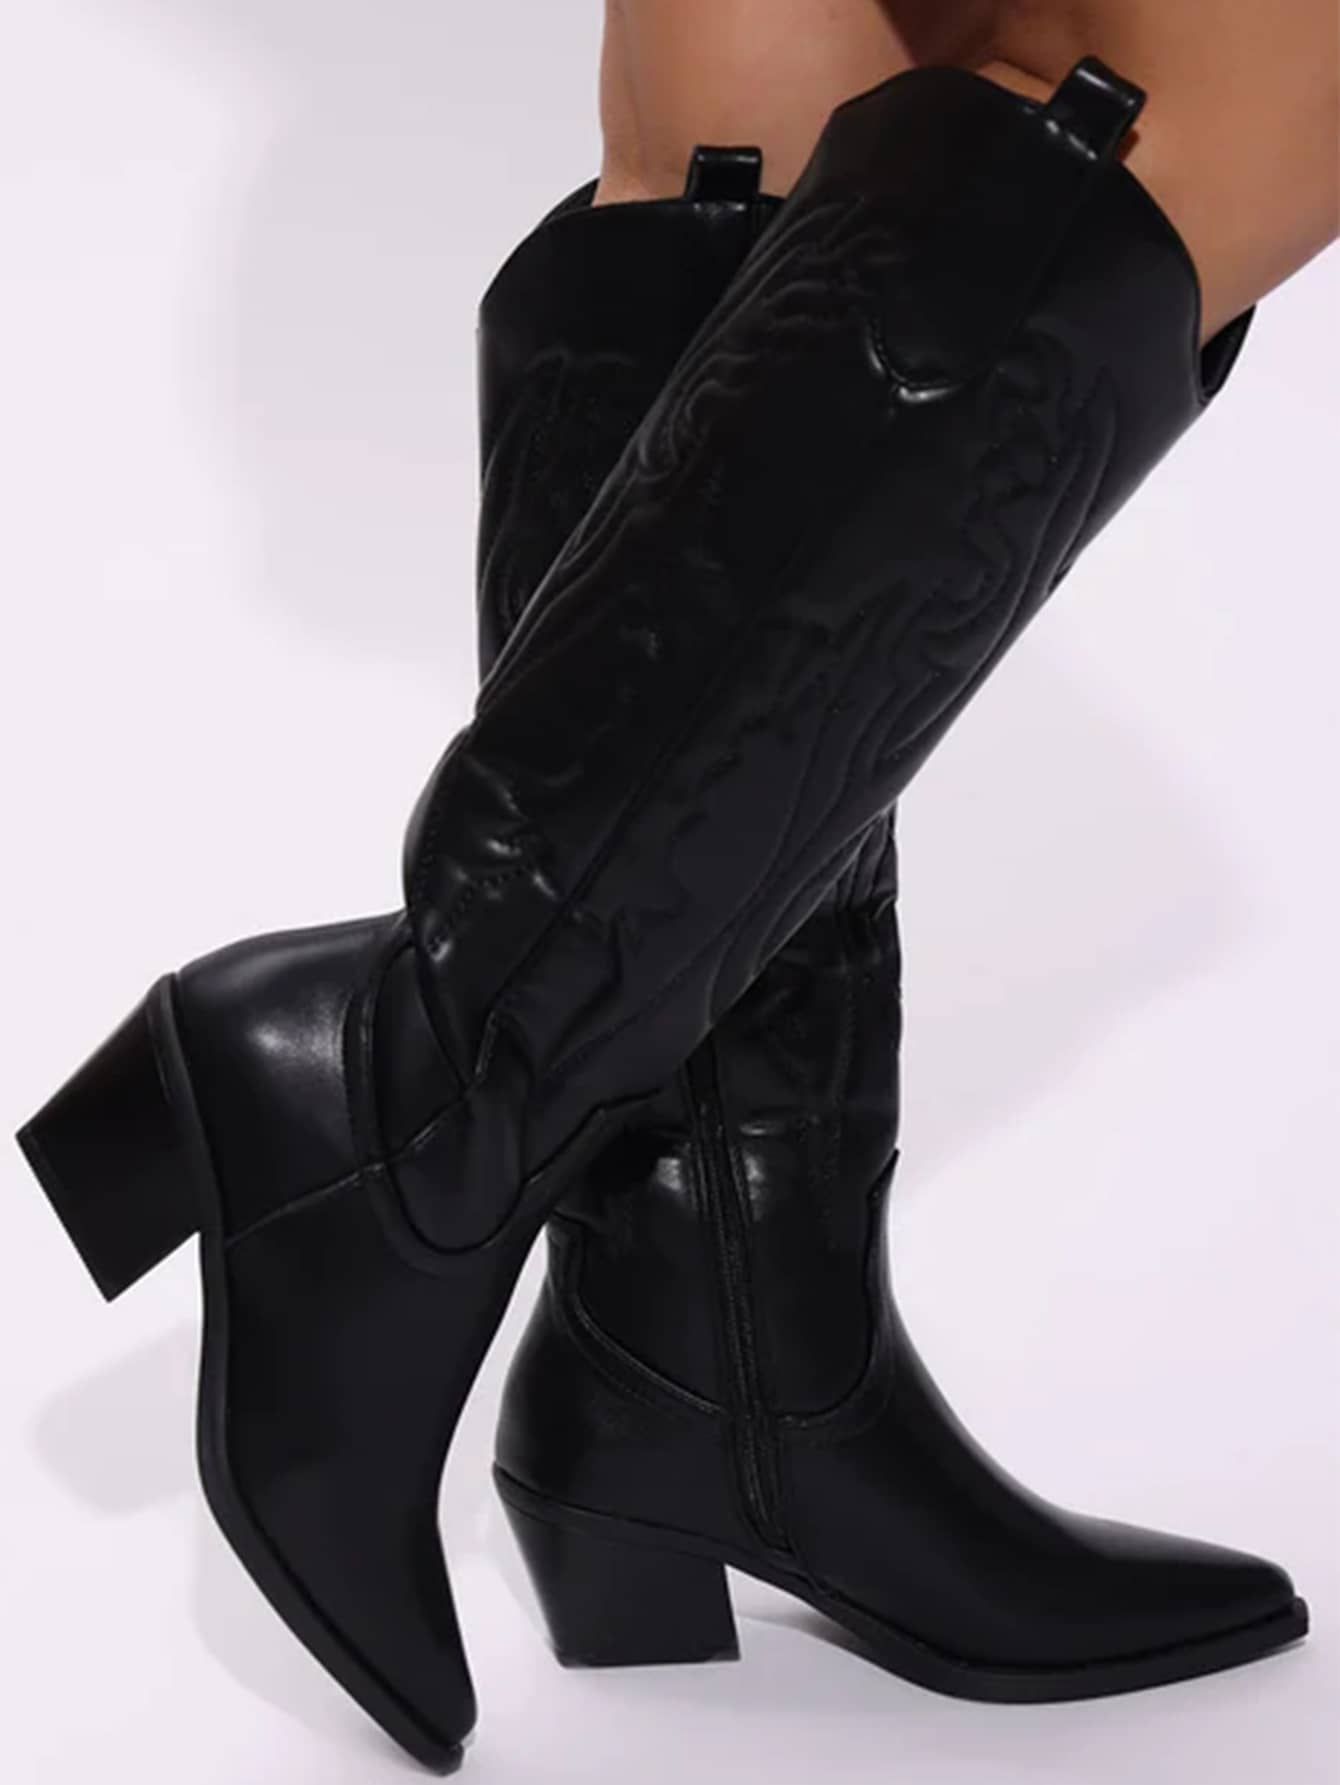 Black Western Cowboy Boots With Embroidery Design, Stitching Details And Thick Heel | SHEIN